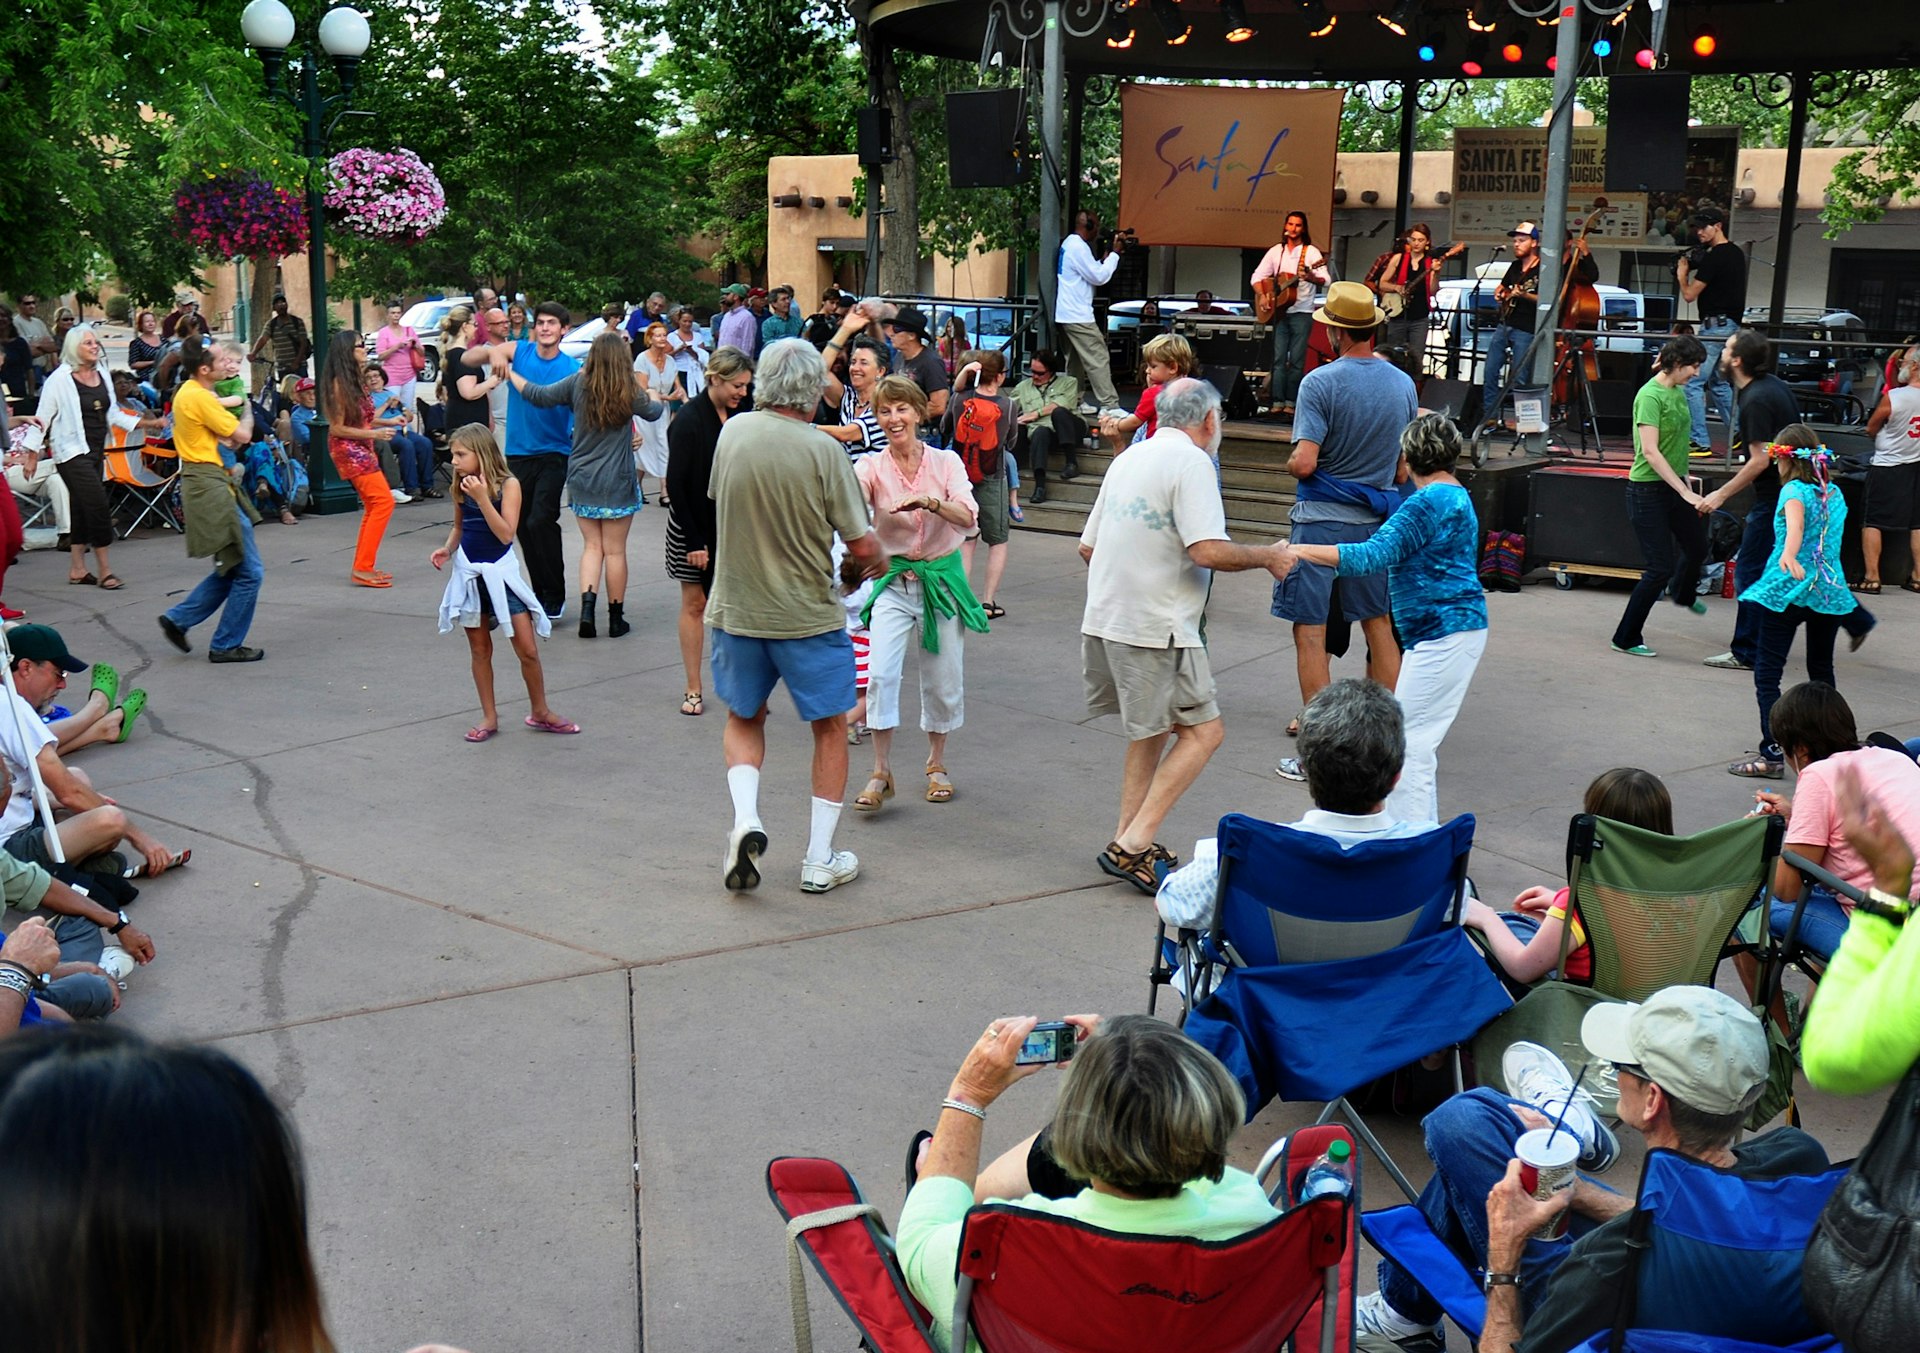 Dancers and spectators enjoy a summer music concert in the historic Plaza in downtown Santa Fe, New Mexico.